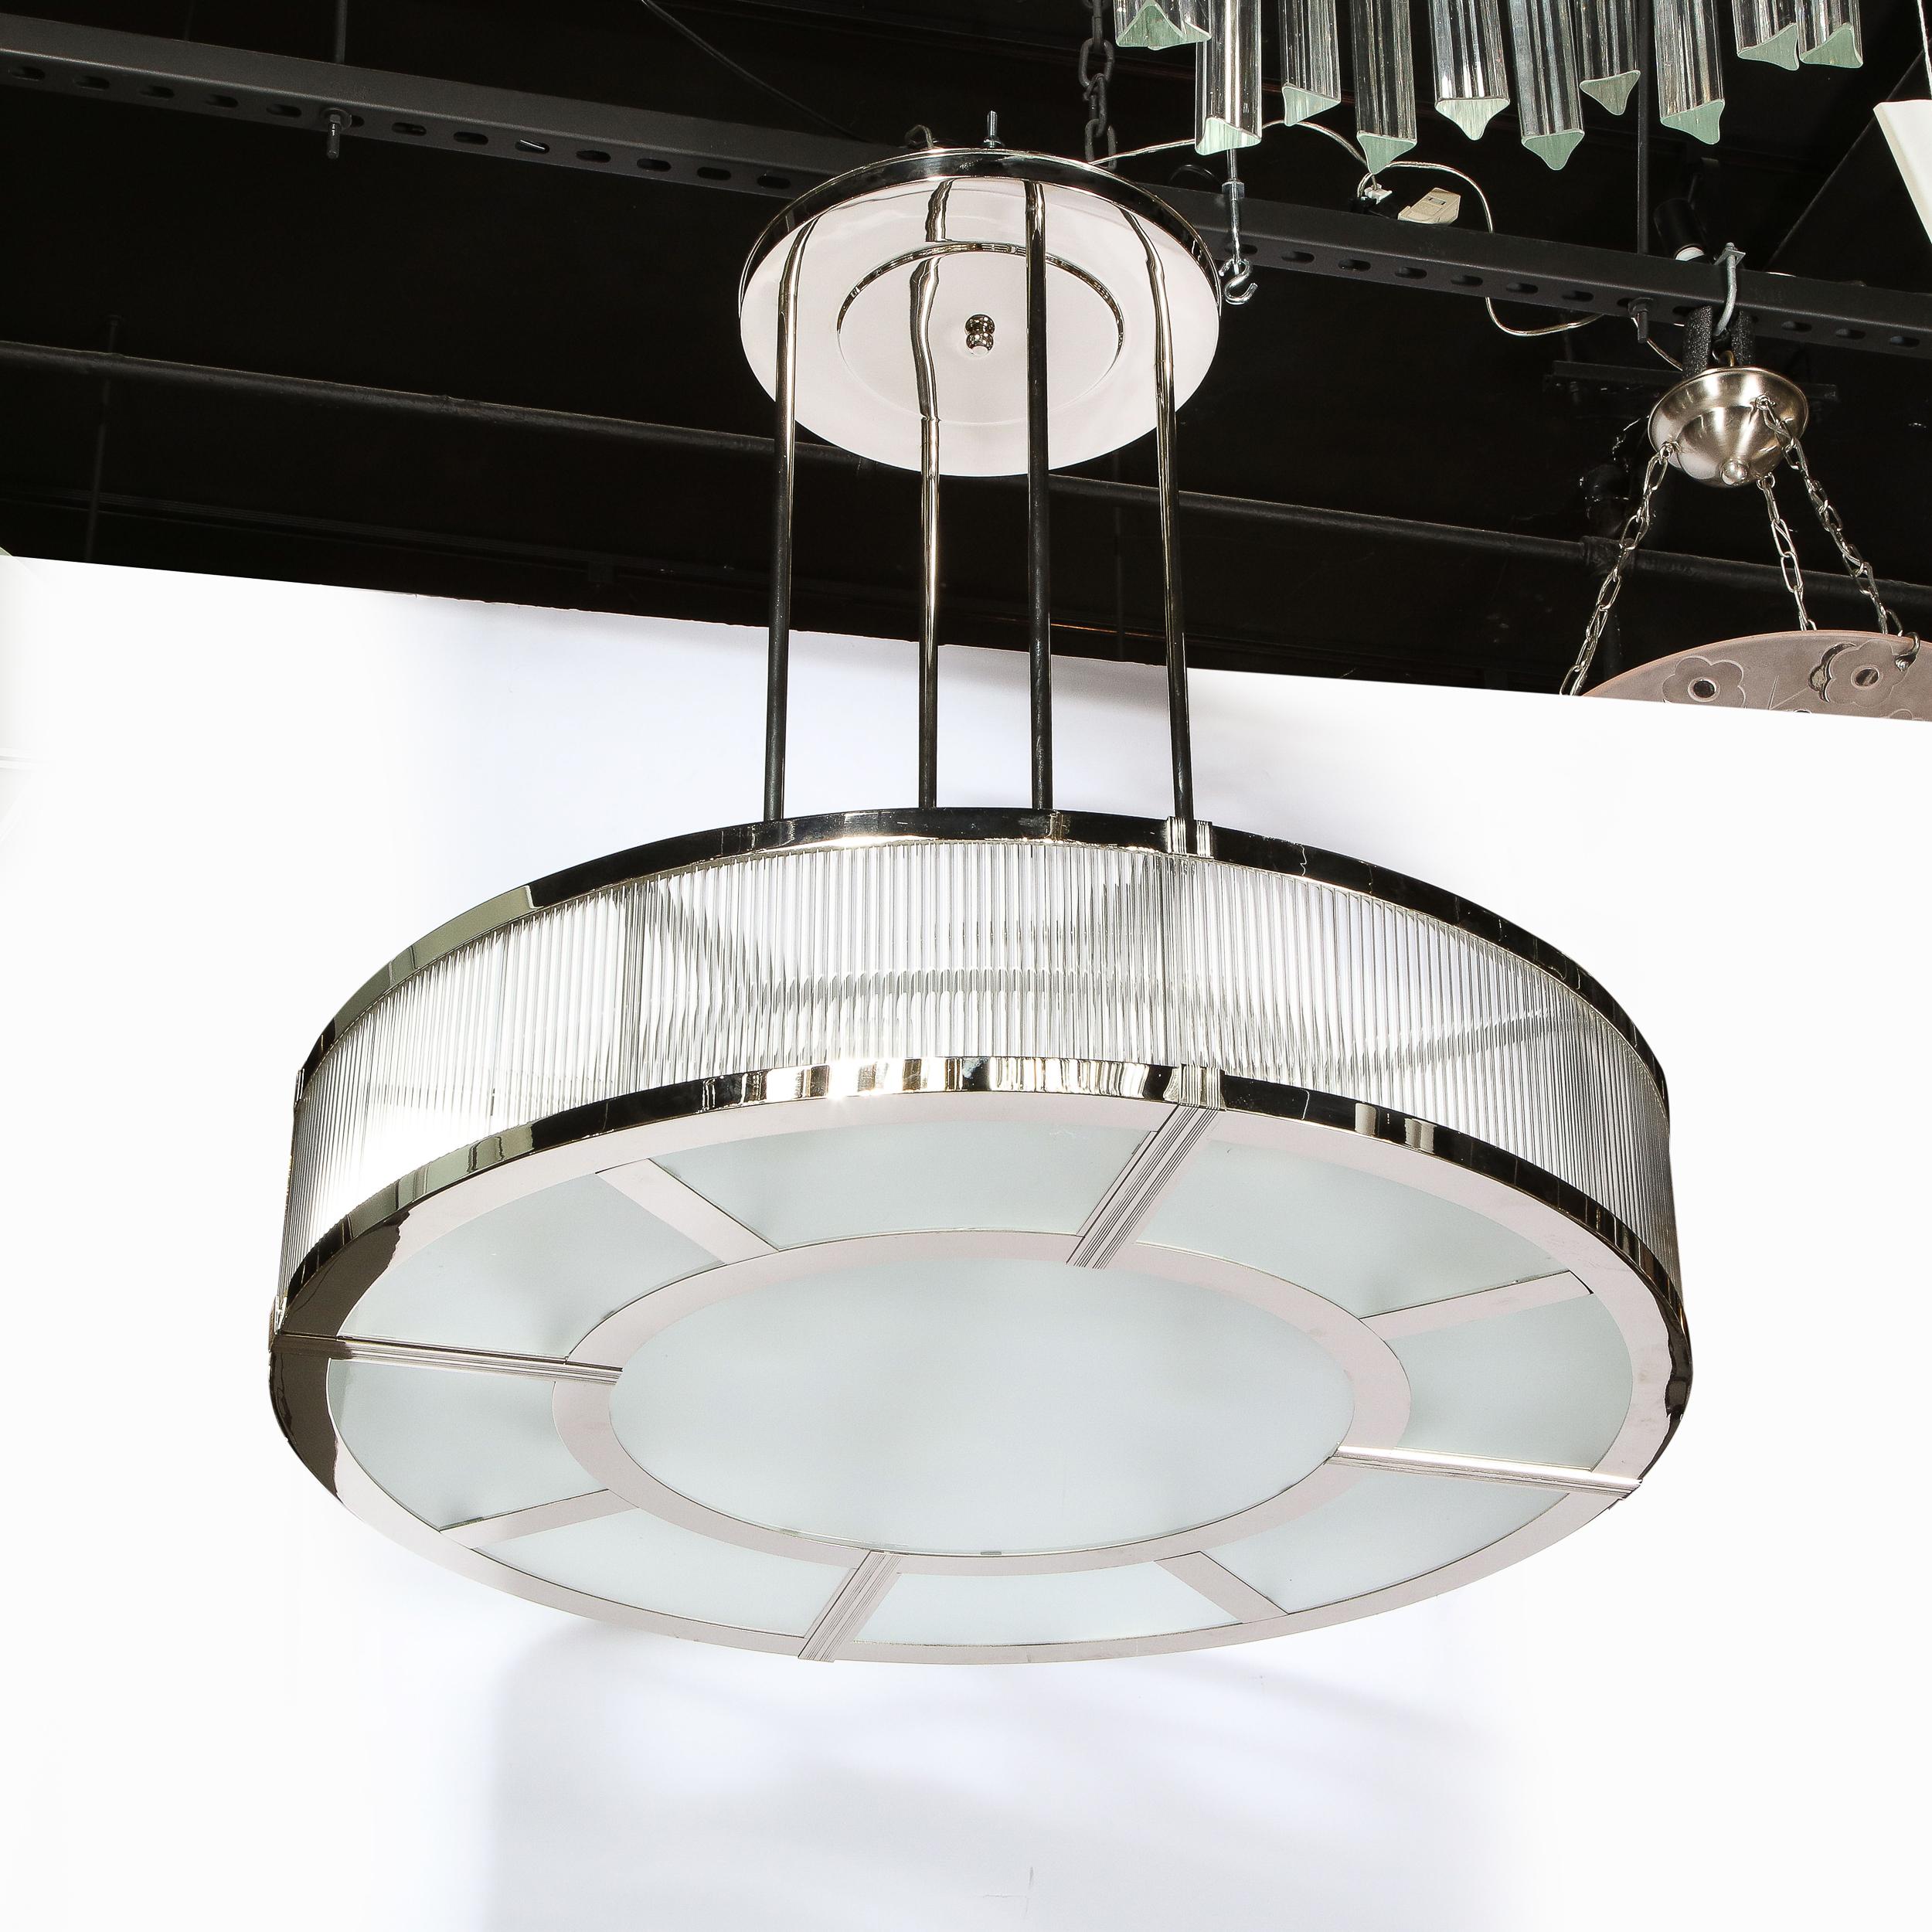 Streamlined Art Deco Revival Circular Chandelier in Polished Nickel & Glass 1